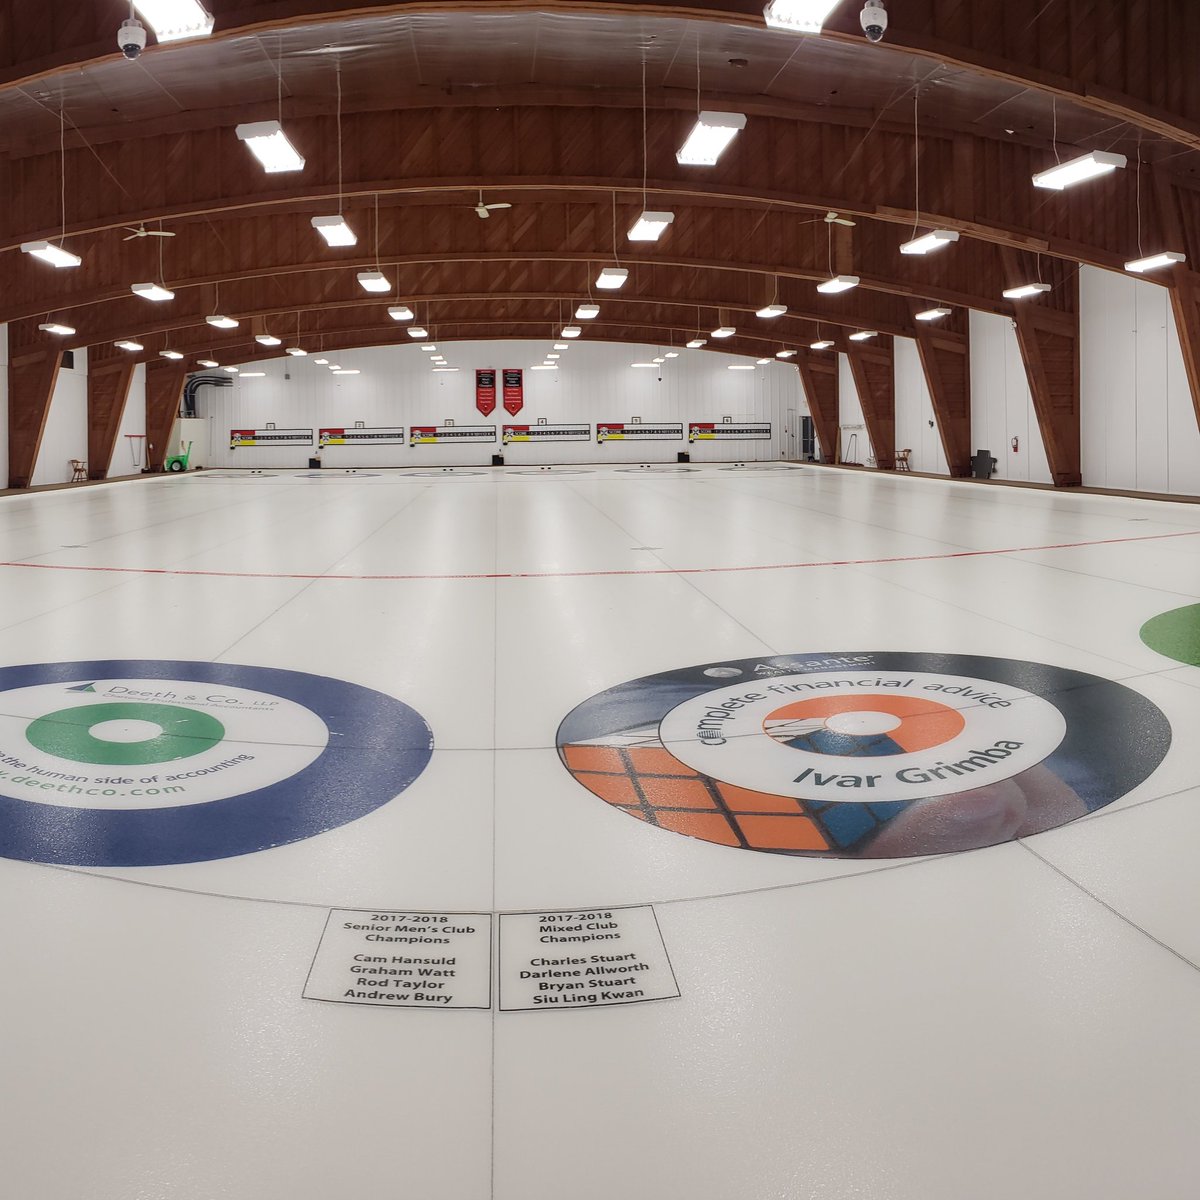 Practice ice @Mississauguagcc is ready to go! Look everyone...NO knee prints!
#letskeepitthatway
#icemaintenance 
#curling